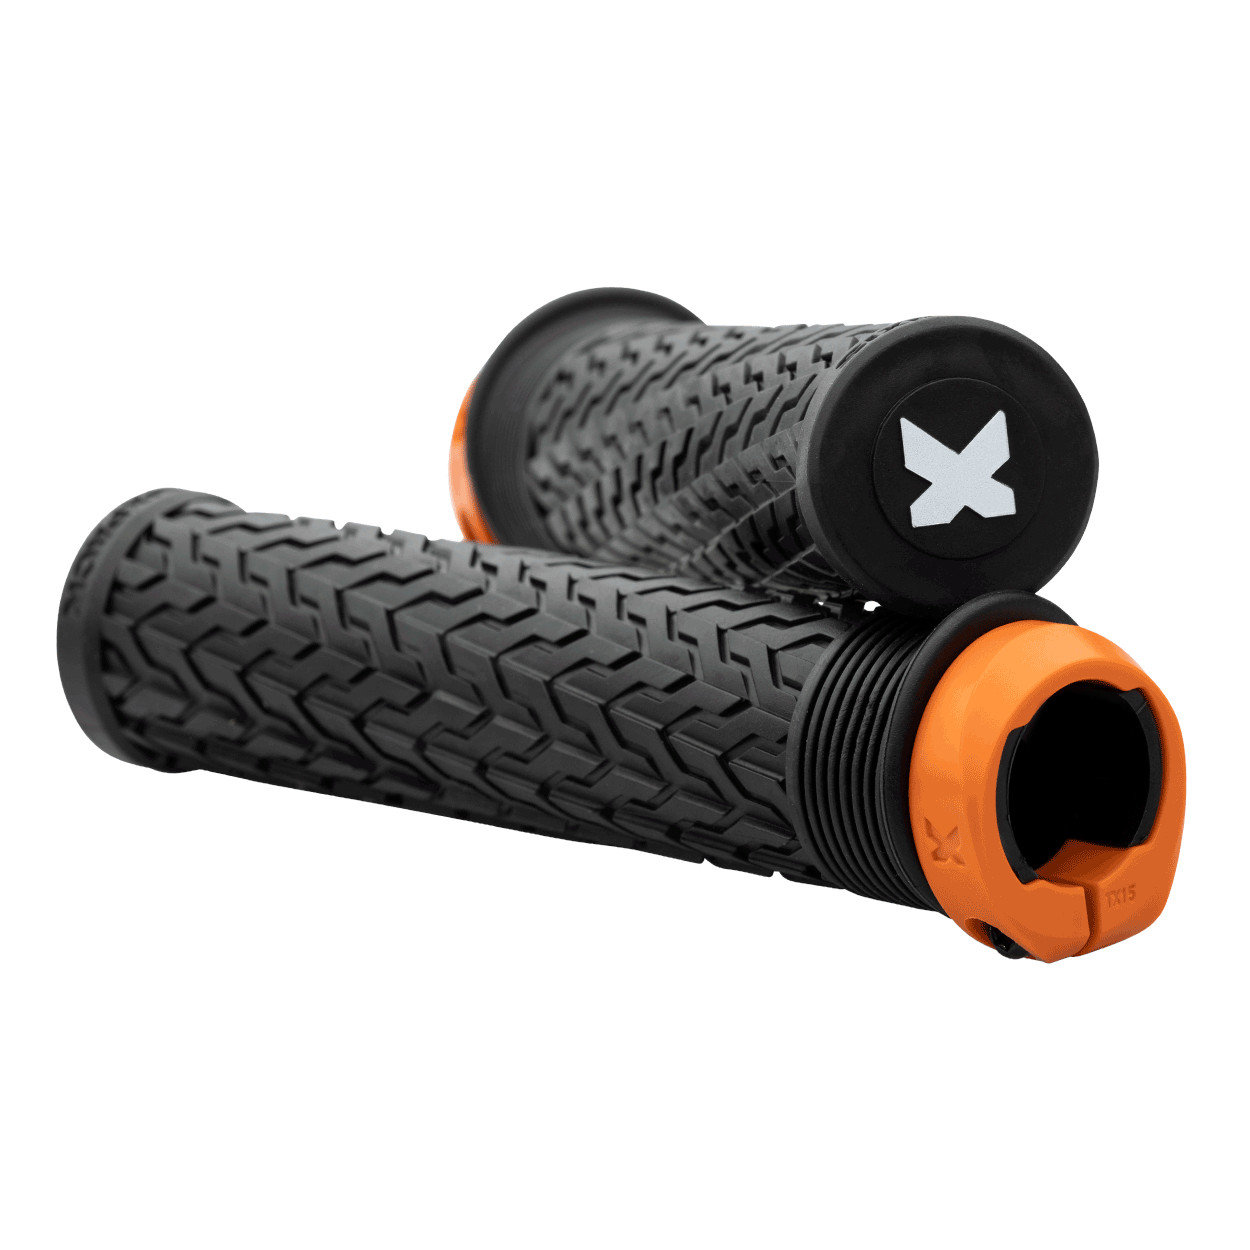 Picture of Sixpack S-Trix PA Lock-On Handlebar Grips - Foxhunt orange